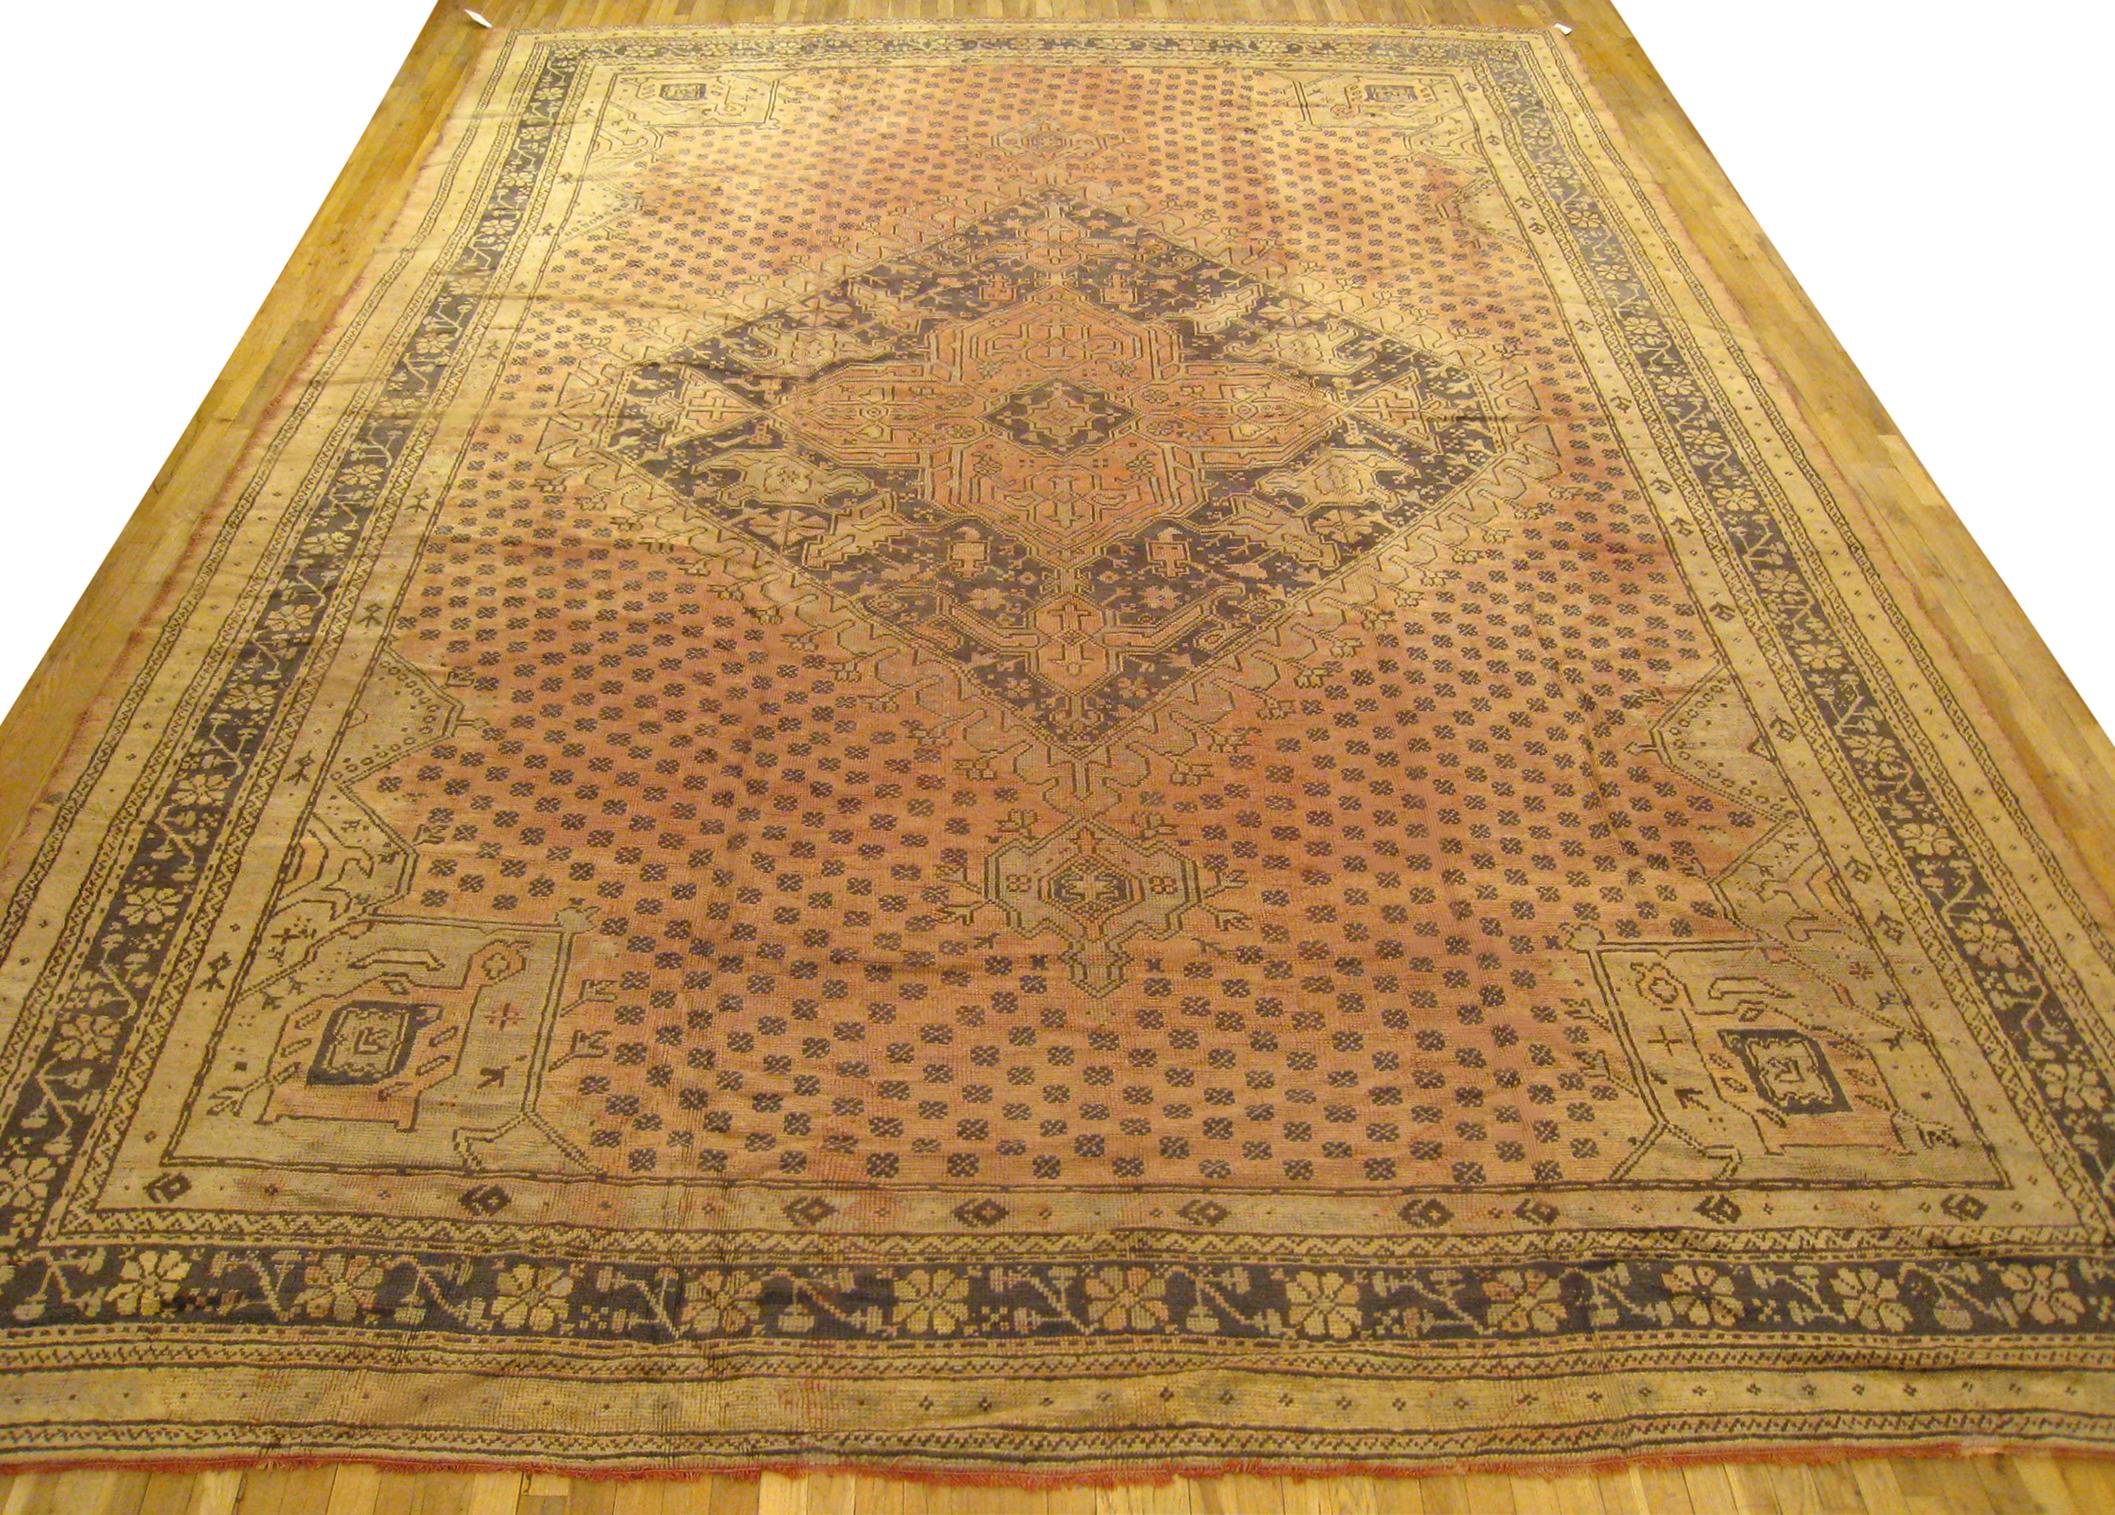 Vintage Turkish Oushak rug, size 17'0 H x 12'0 W, circa 1930.  This hand-knotted semi-antique wool Turkish carpet features soft earth tones throughout, with a medallion design on a central field covered with small geometric motifs.  This nicely